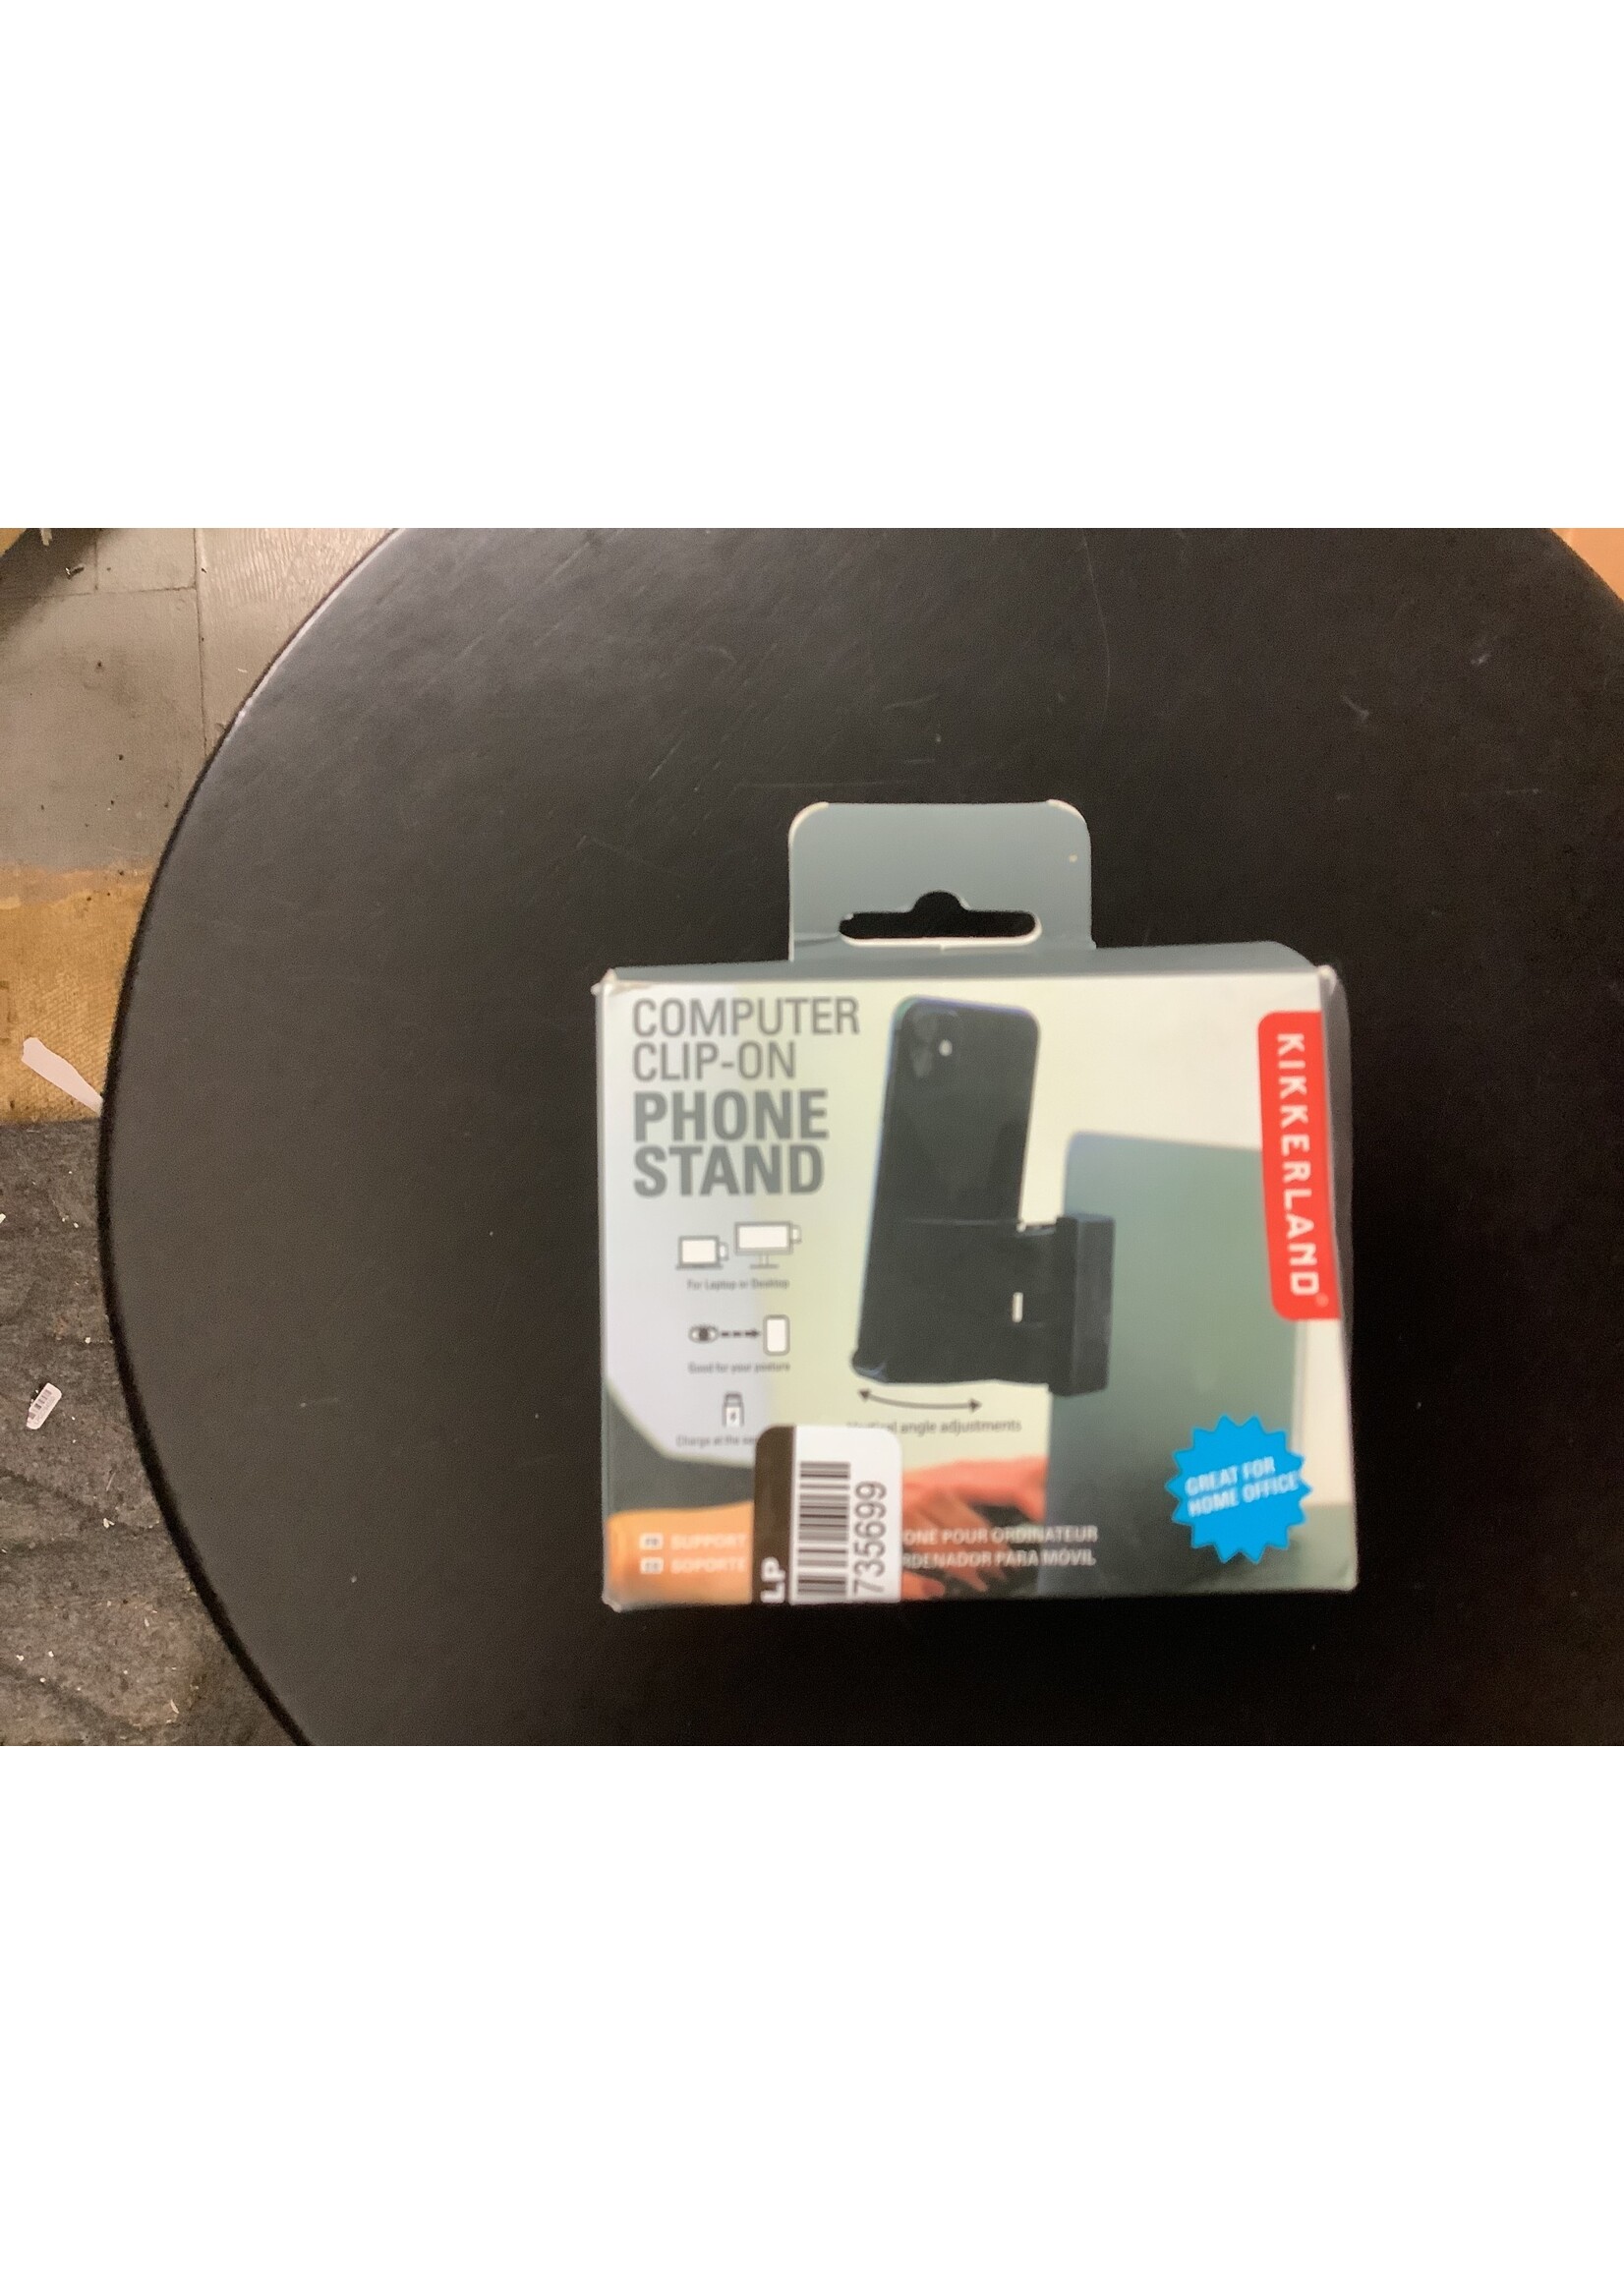 Phone Stand Clip for Computers Black